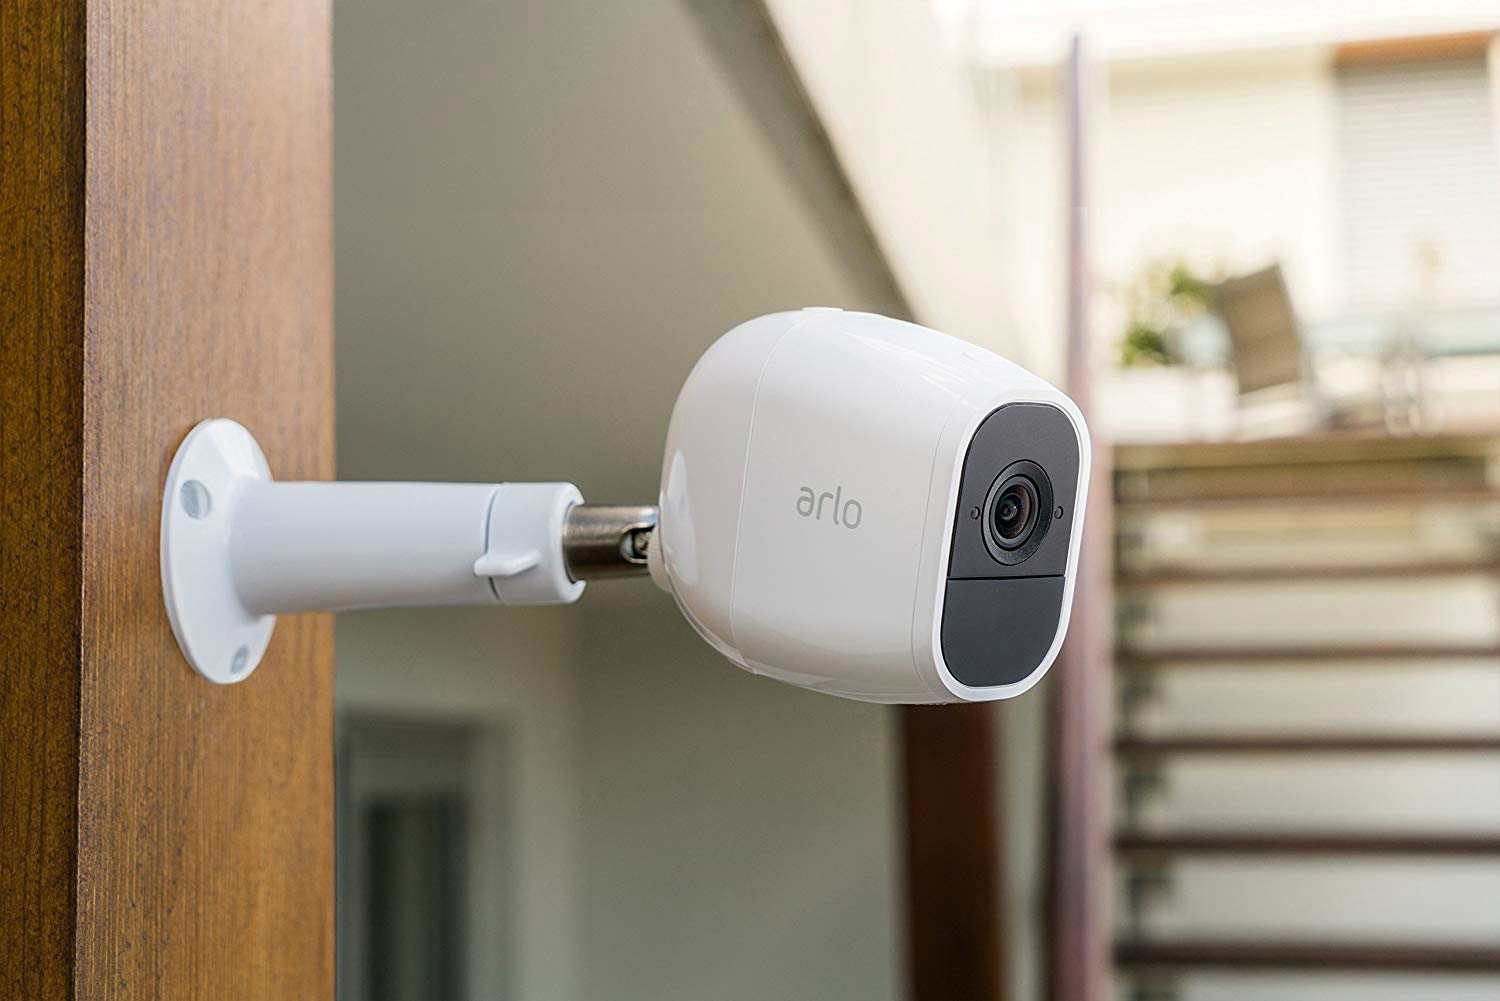 amazon slashes prices on security cameras and systems fathers day arlo pro 2 camera kit